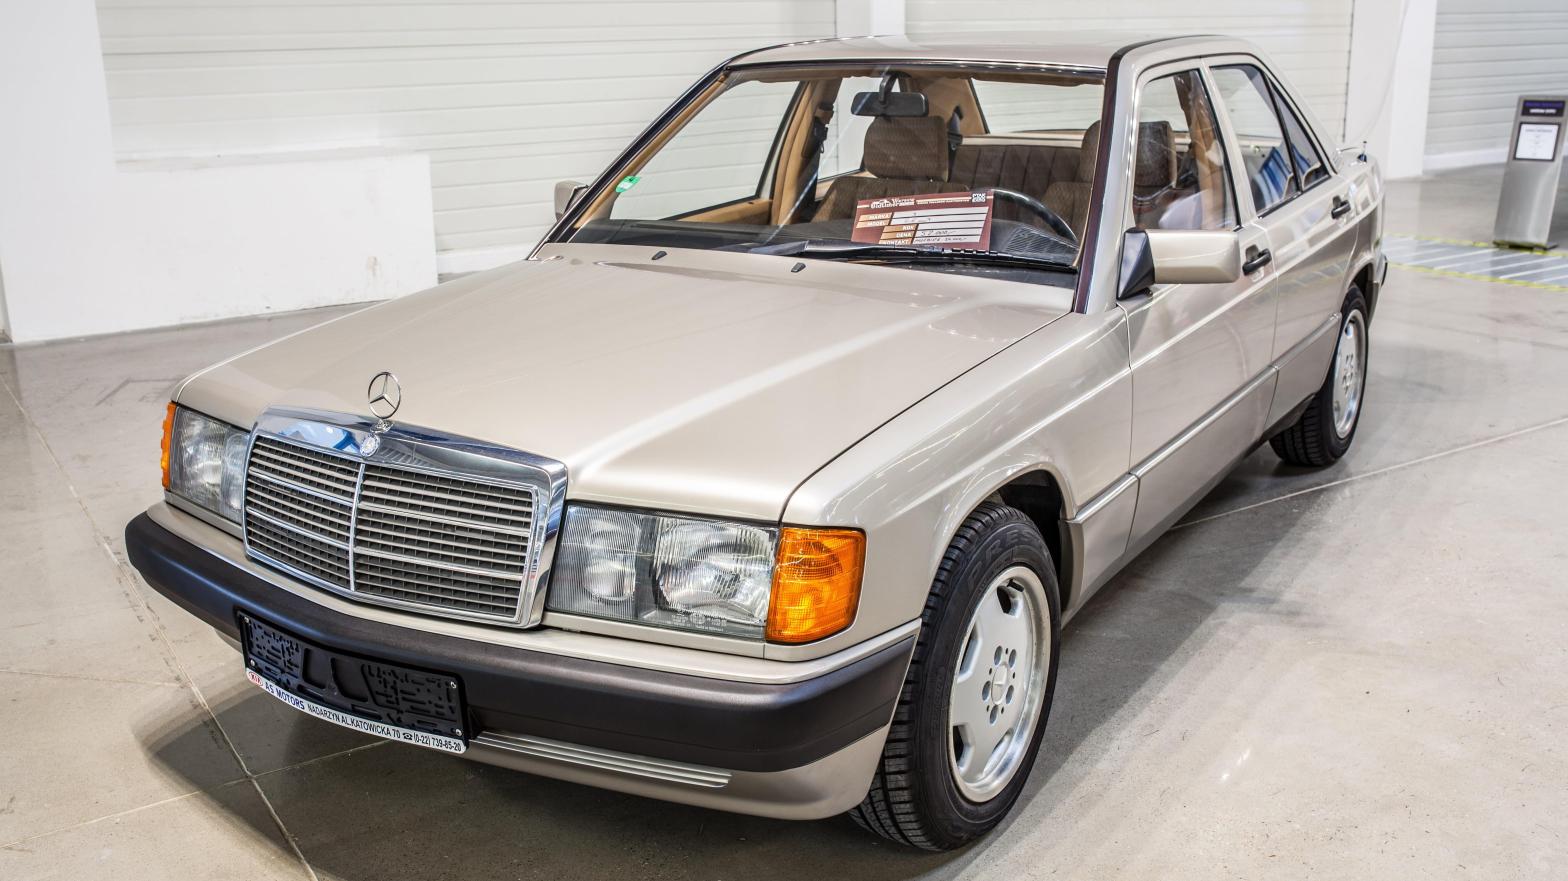 Johnny Bocktune Lew reported his Mercedes-Benz stolen from a shopping centre in Stanford in 1992.  (Image: Grzegorz Czapski, Shutterstock)